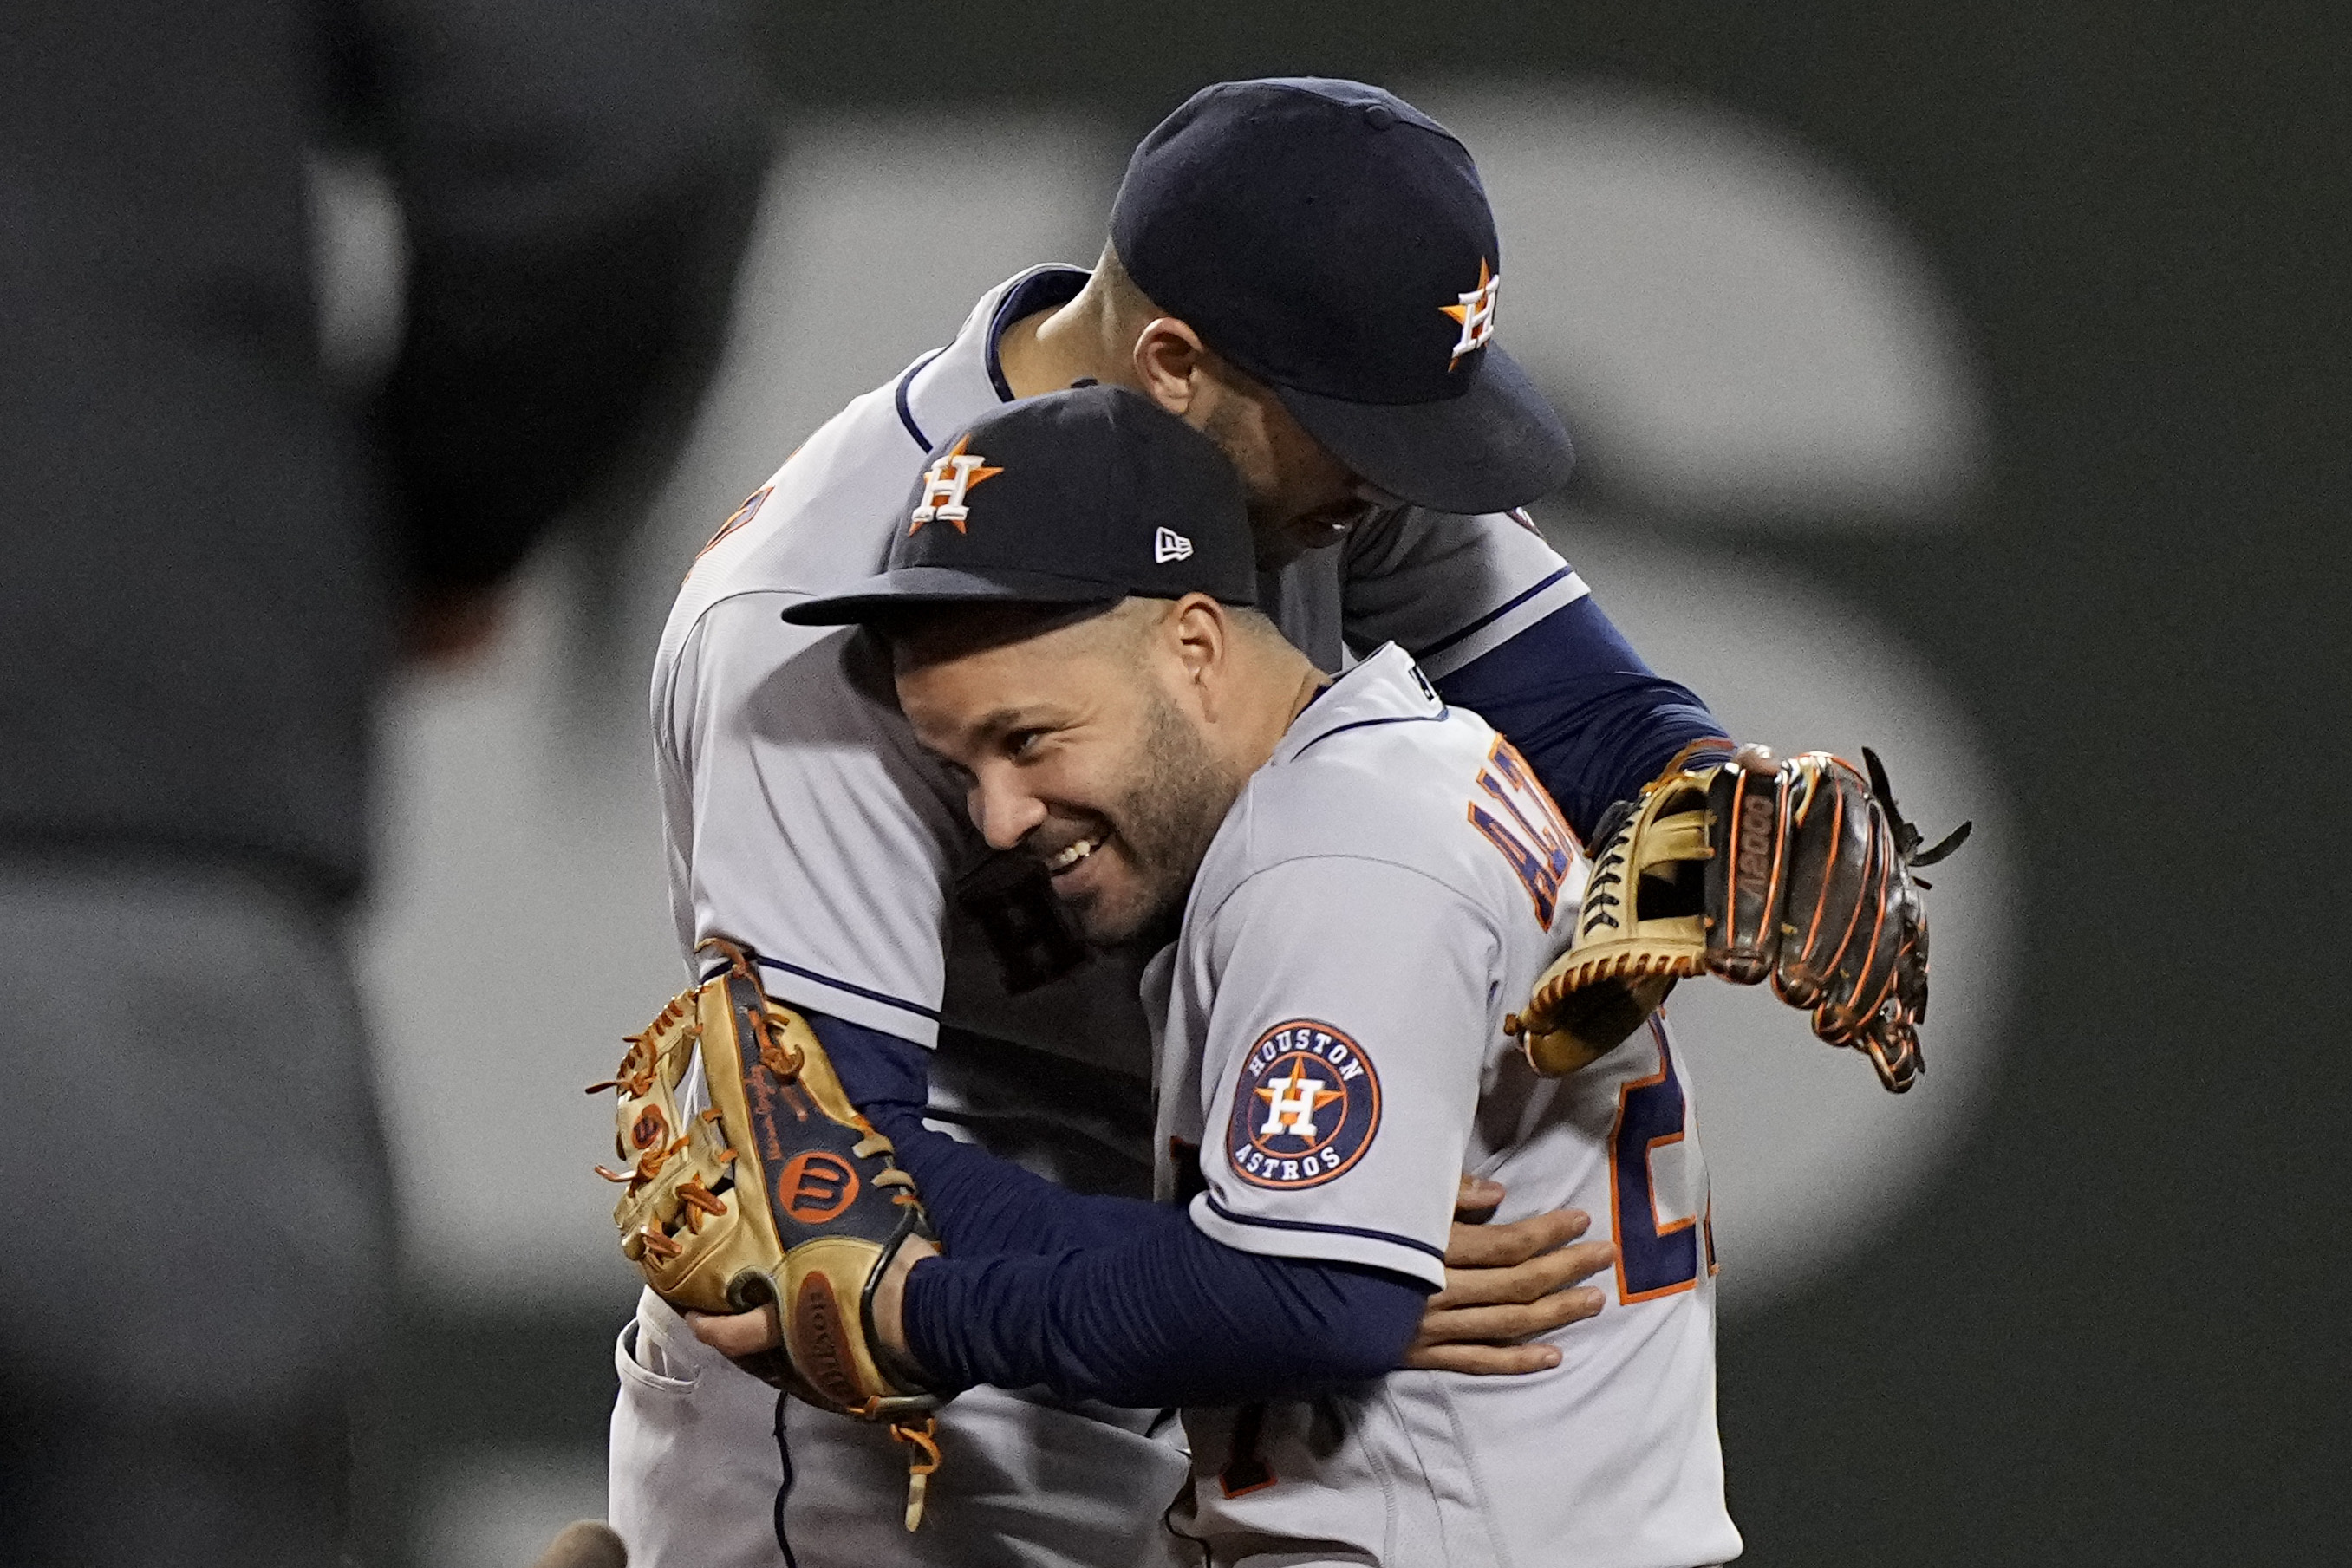 Uniforms need to be switched Altuve is the Daddy, Where's the mini  trashcan? - MLB Twitter reacts to adorable dad-son duo dressed up as Jose  Altuve and Aaron Judge for Halloween